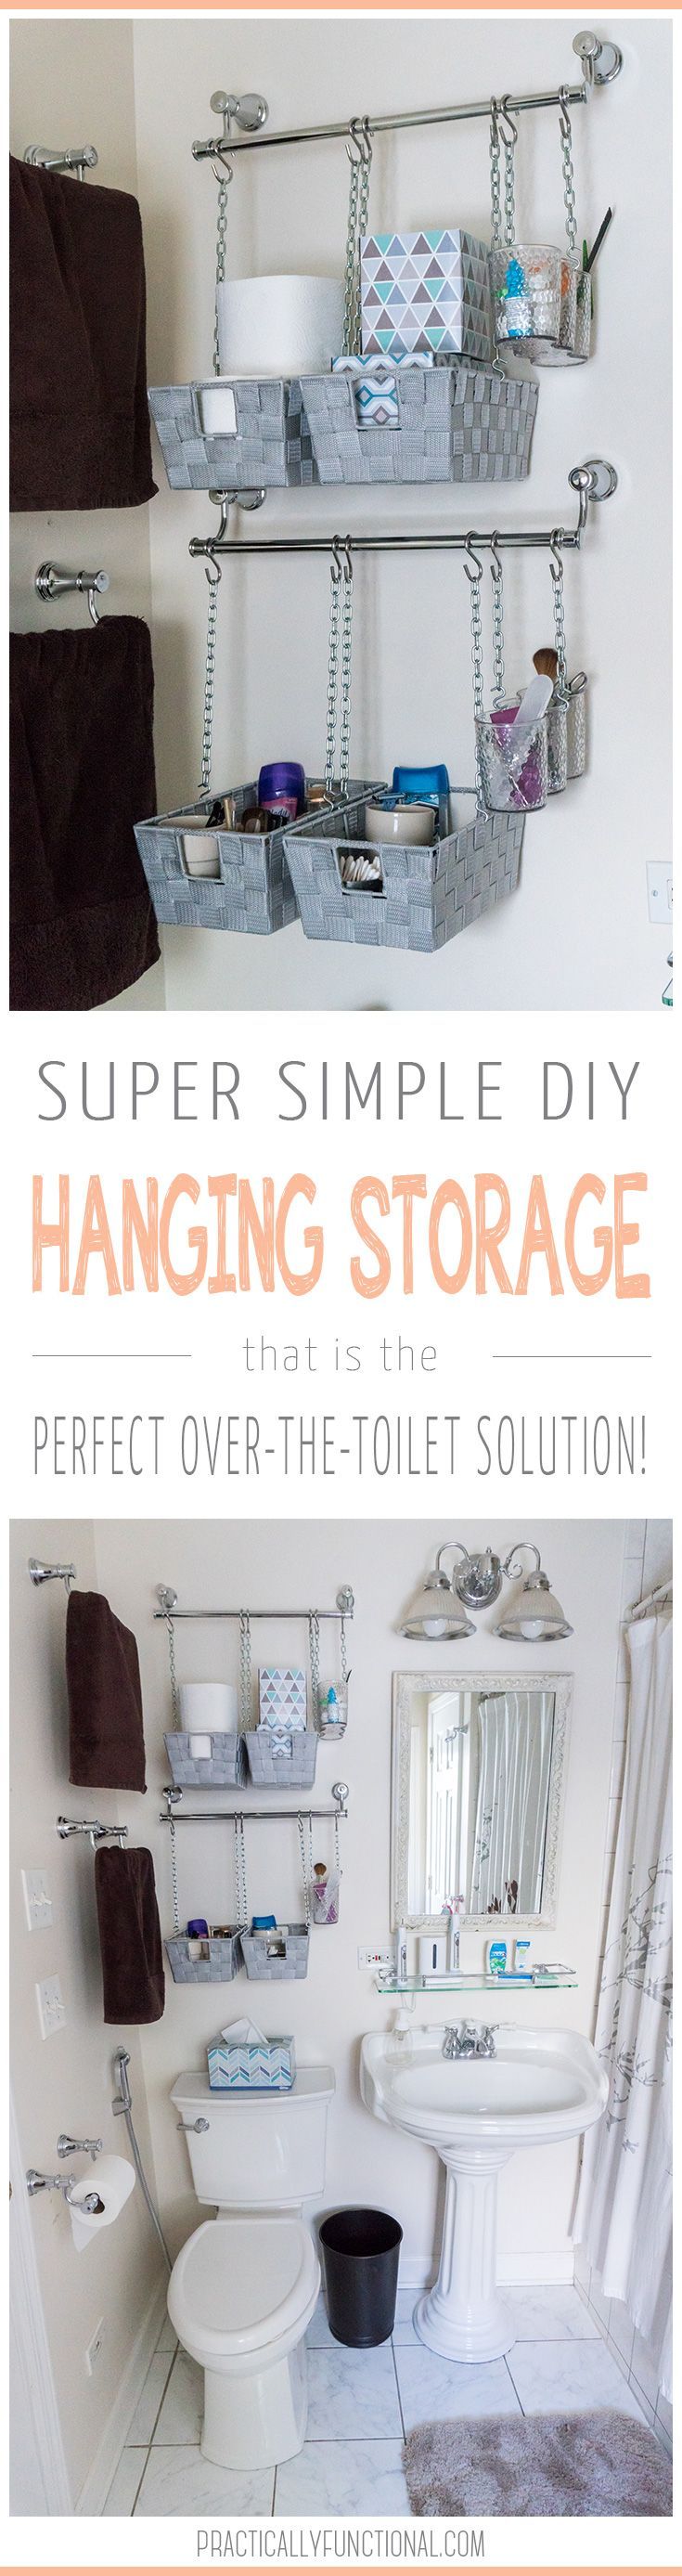 Need over the toilet storage? Install towel bars and hang baskets from them to m...